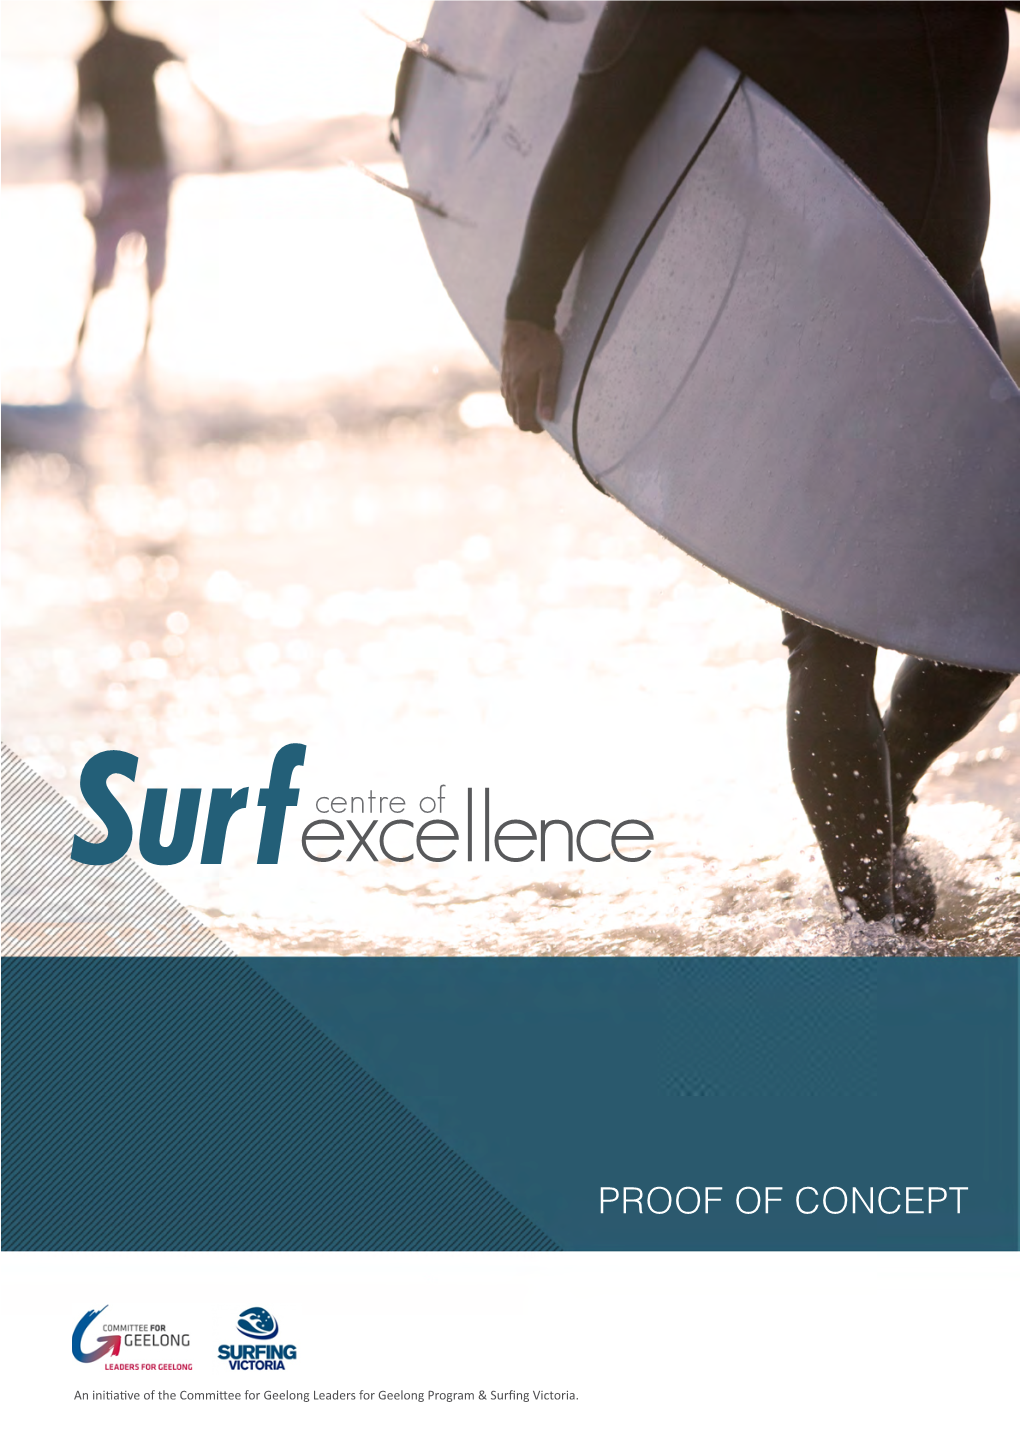 Surf Centre for Excellence